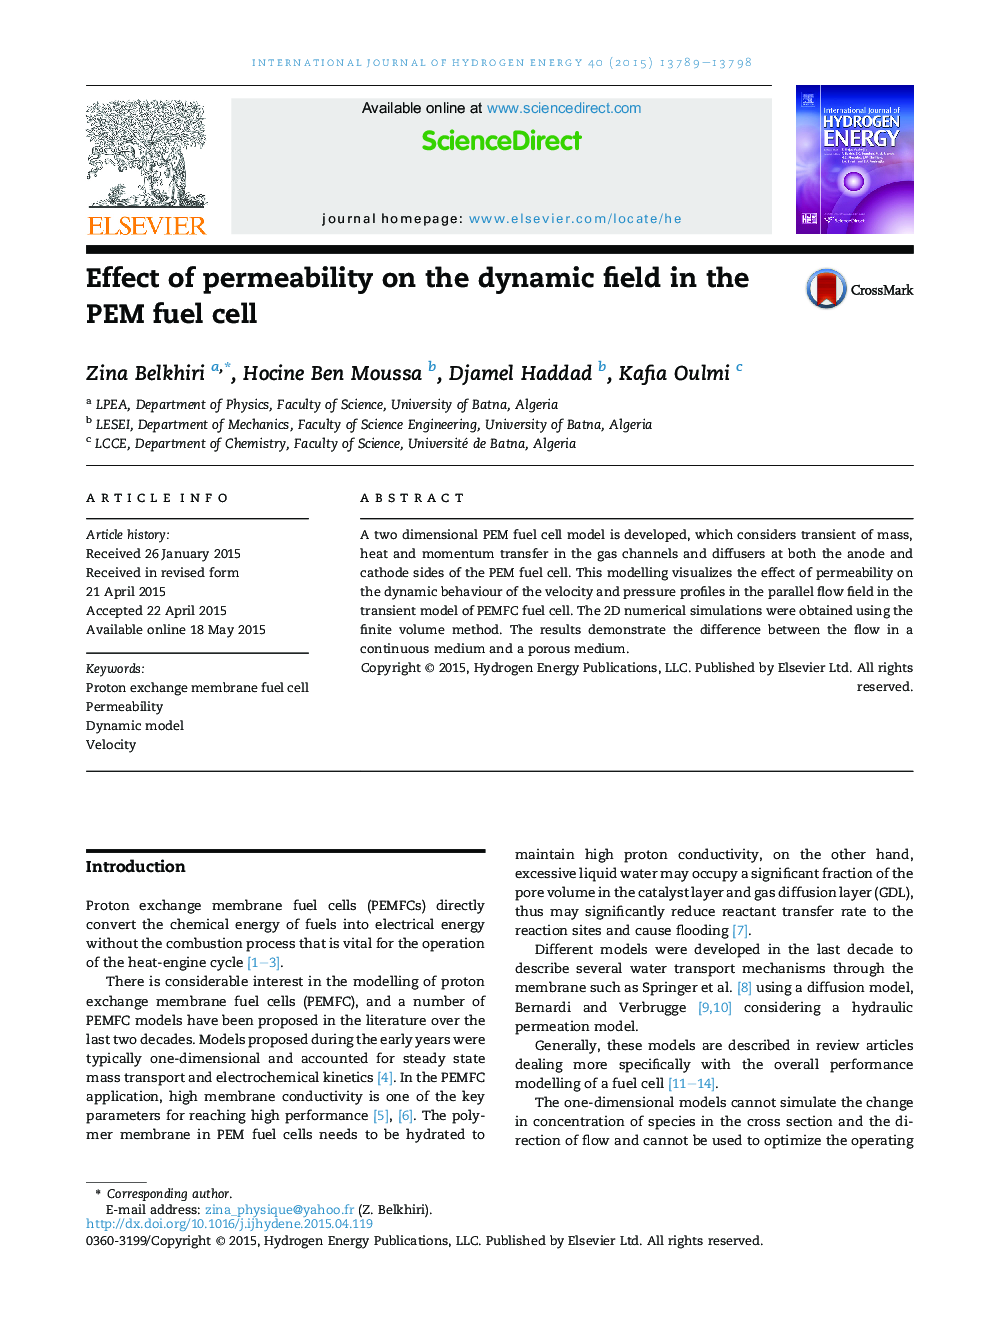 Effect of permeability on the dynamic field in the PEM fuel cell